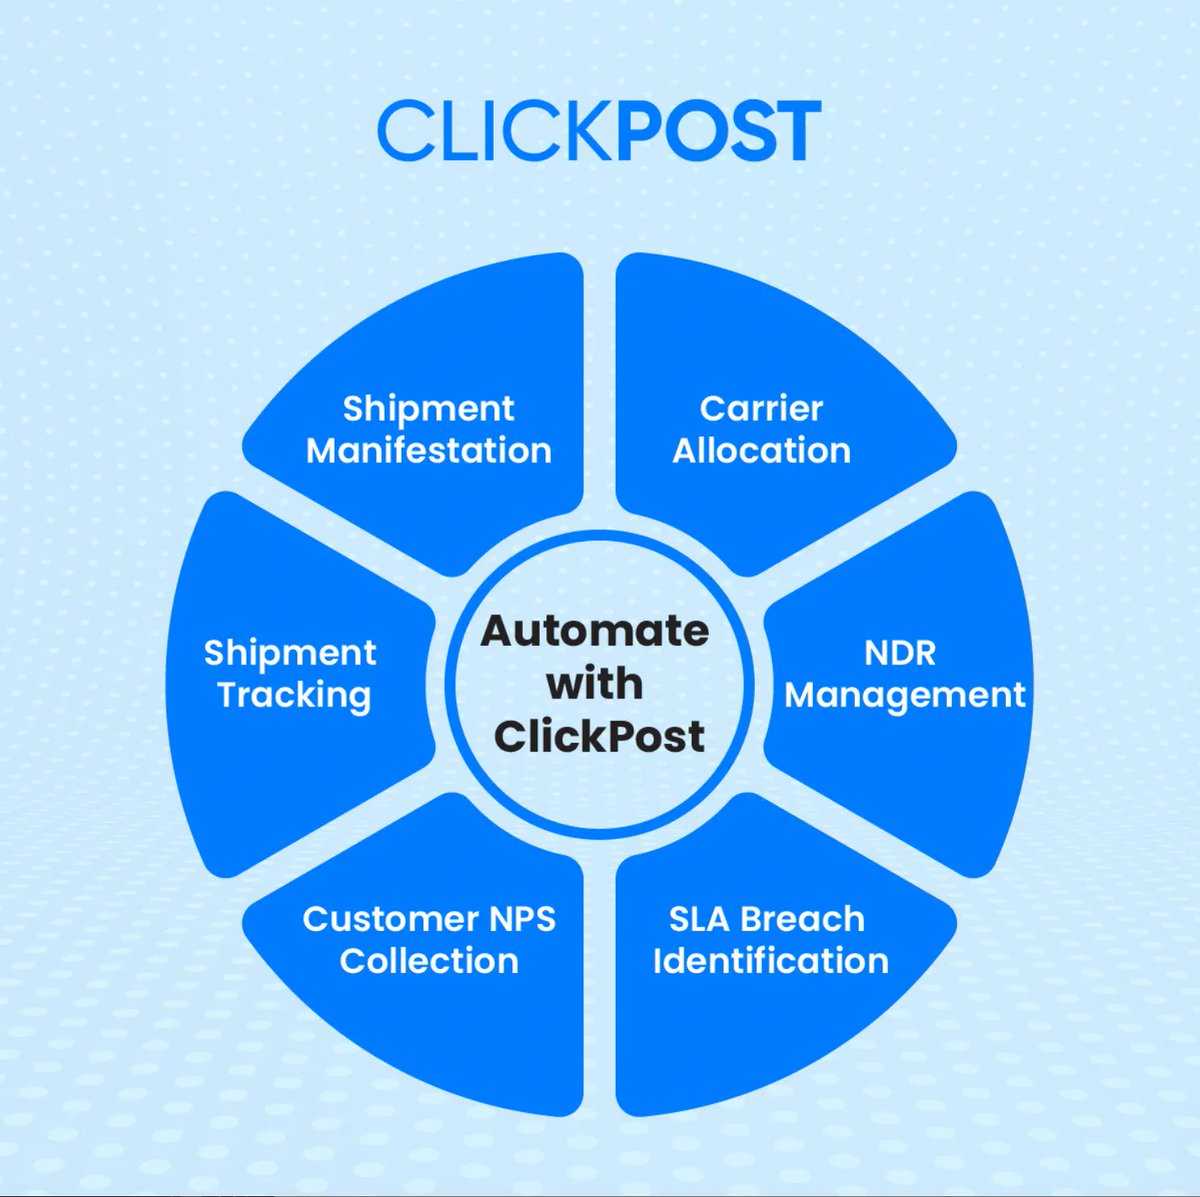 ClickPost - For Intelligent Automation

#logisticssoftware #logistics #logisticsmanagement #logisticssolution #automation #logisticsmanagementsoftware #logistiksoftware  #ecommerce #delivery #clickpost  #artificialintelligence #machinelearning #integration #oneapitorulethemall